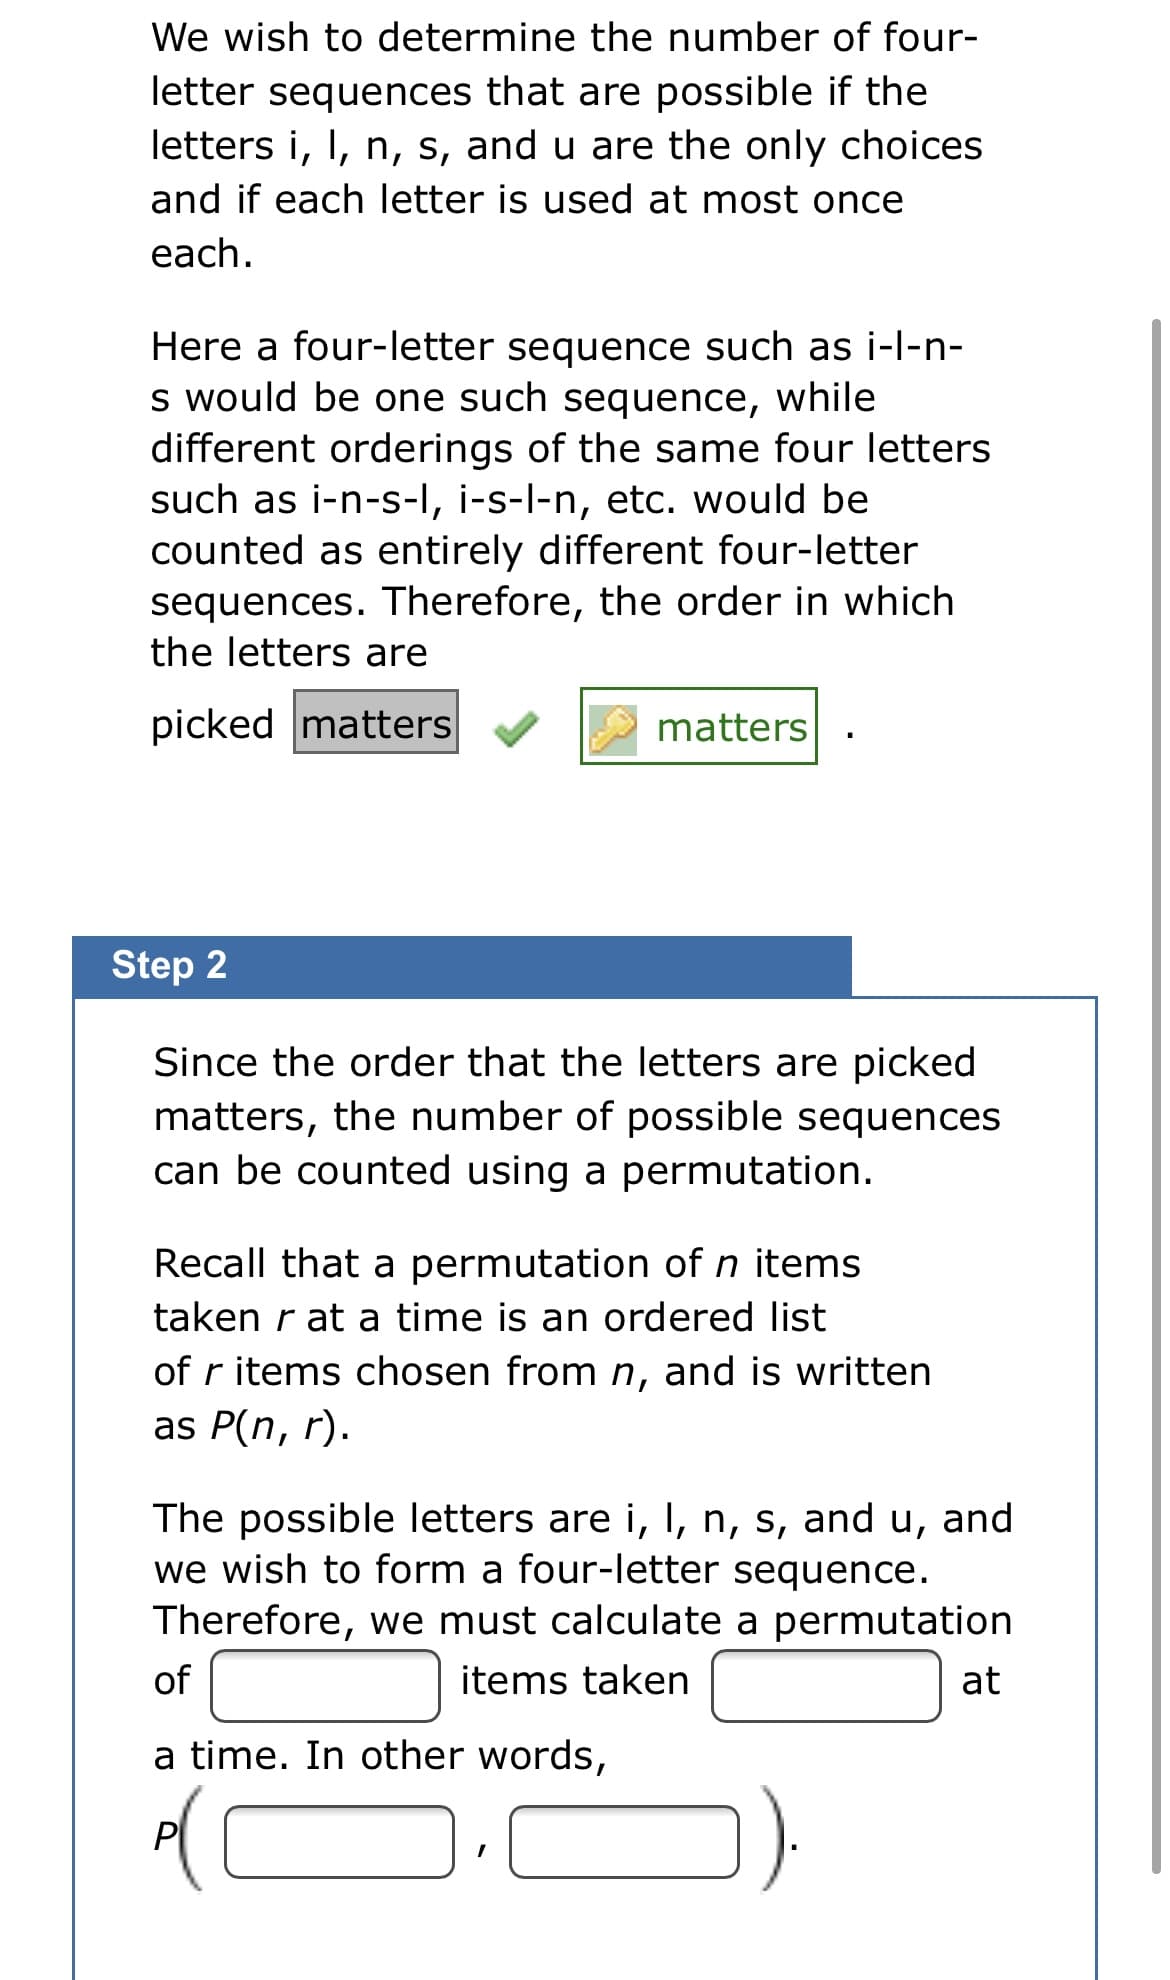 We wish to determine the number of four-
letter sequences that are possible if the
letters i, I, n, s, and u are the only choices
and if each letter is used at most once
each.
Here a four-letter sequence such as i-l-n-
s would be one such sequence,
different orderings of the same four letters
such as i-n-s-I, i-s-l-n, etc. would be
counted as entirely different four-letter
sequences. Therefore, the order in which
the letters are
while
picked matters
matters
Step 2
Since the order that the letters are picked
matters, the number of possible sequences
can be counted using a permutation.
Recall that a permutation of n items
taken r at a time is an ordered list
of r items chosen from n, and is written
as P(n, r).
The possible letters are i, I, n, s, and u, and
we wish to form a four-letter sequence.
Therefore, we must calculate a permutation
of
items taken
at
a time. In other words,
